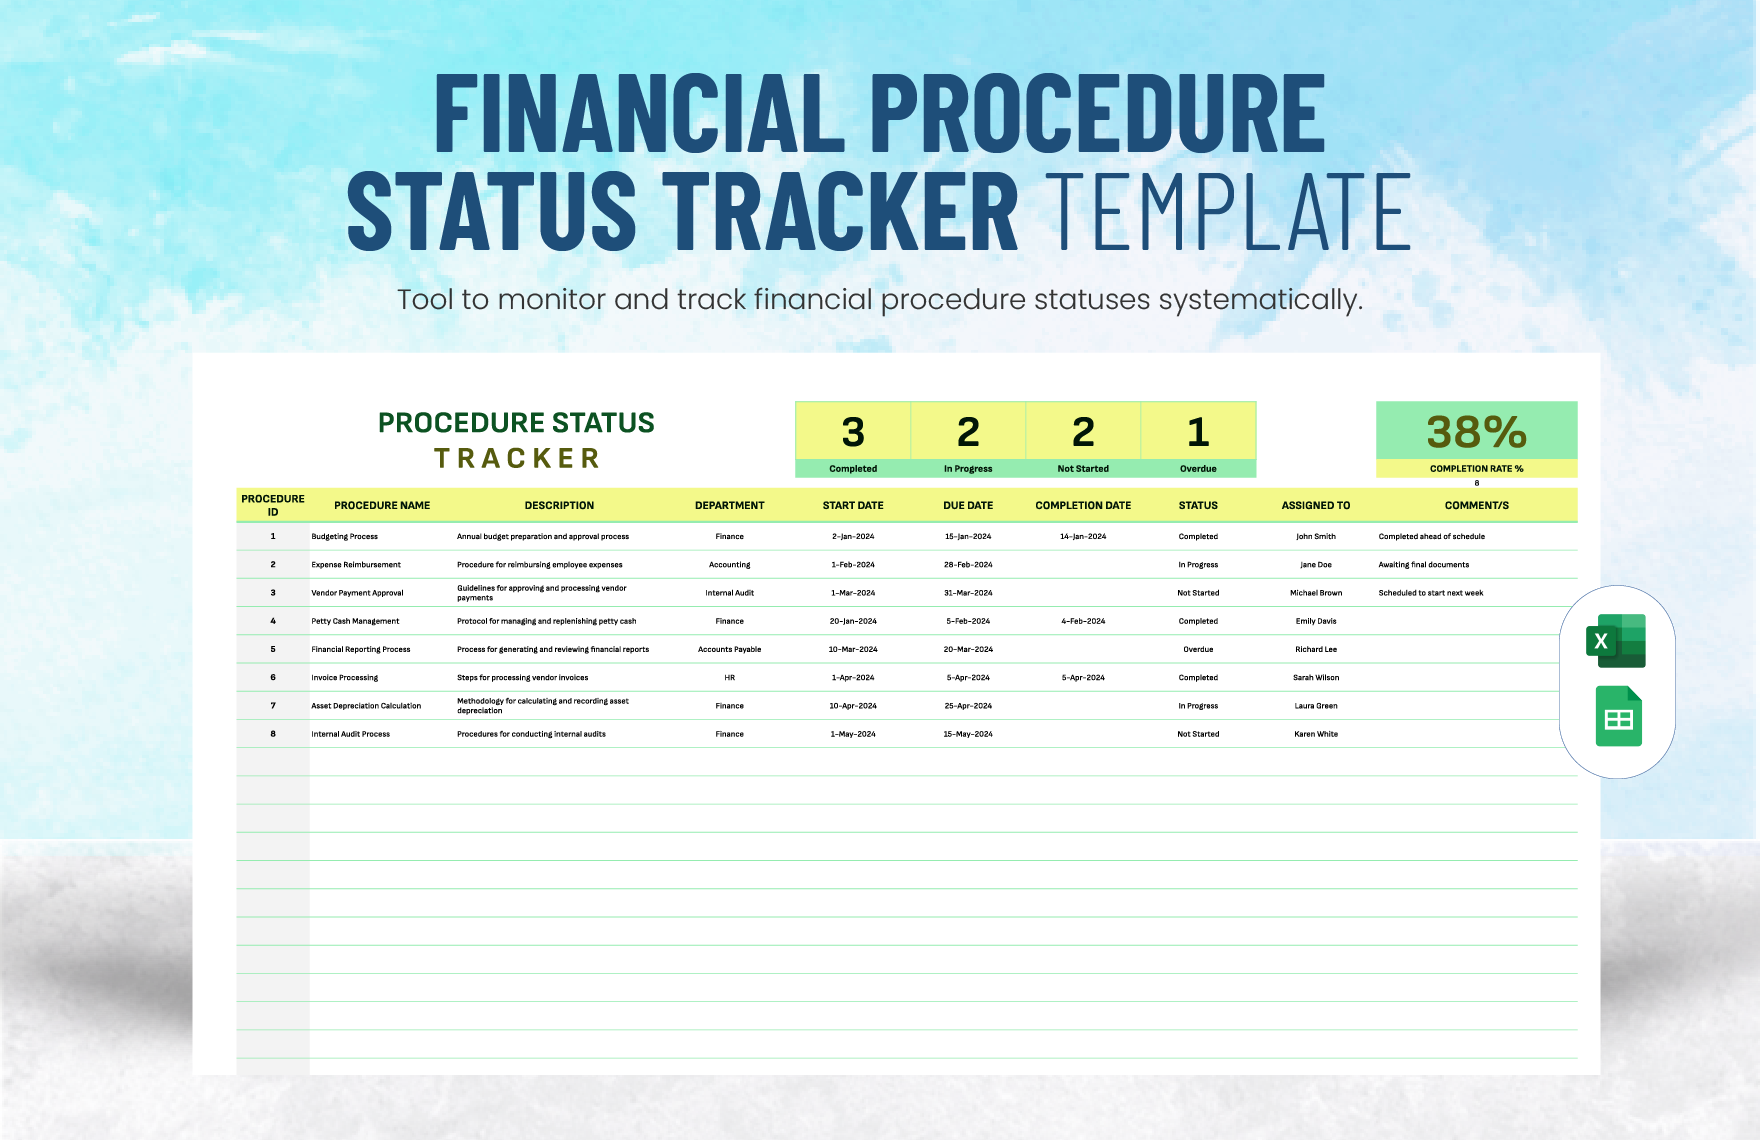 Financial Procedure Status Tracker Template in Excel, Google Sheets